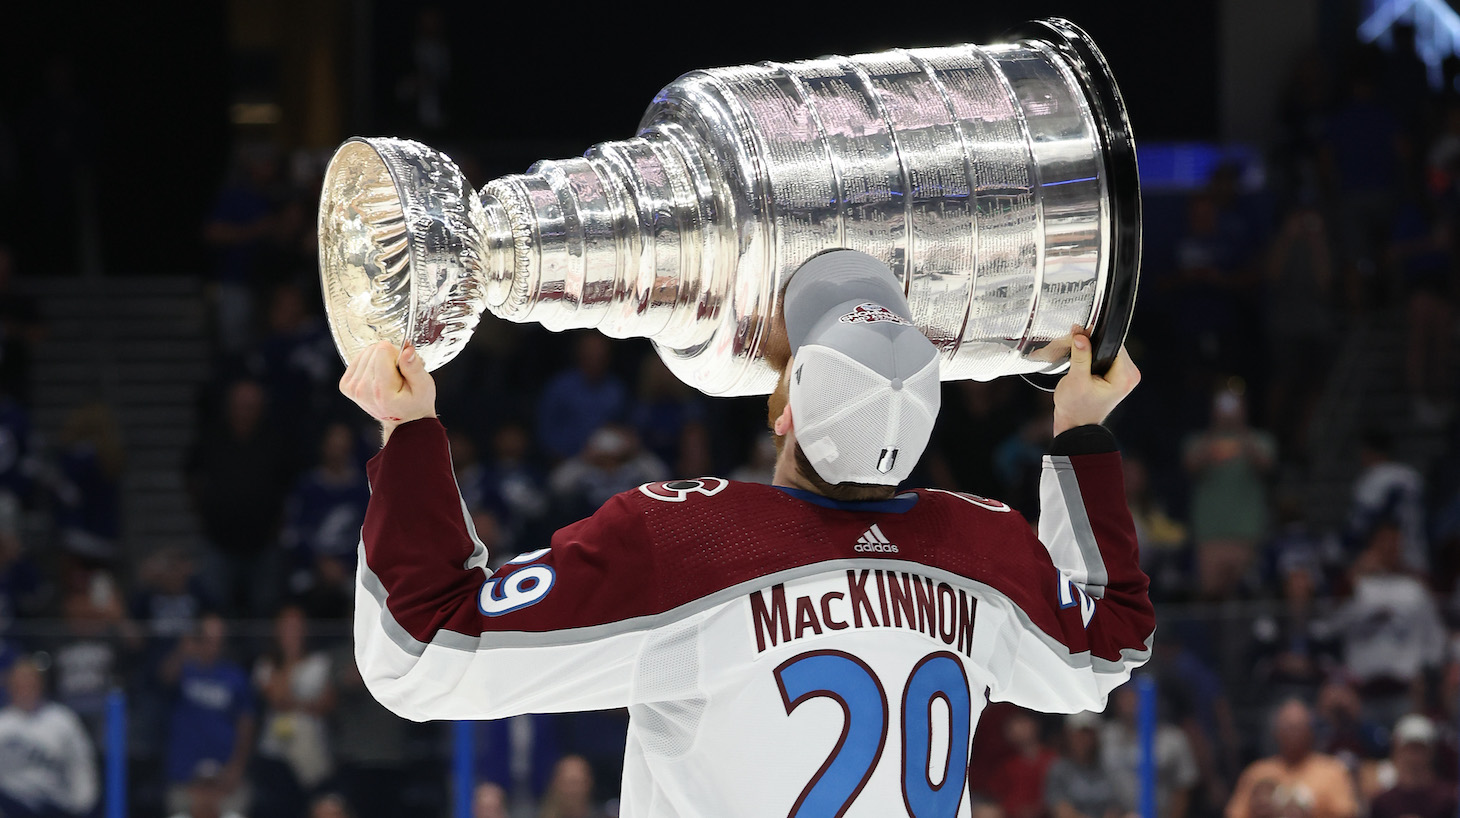 TAMPA, FLORIDA - JUNE 26: Nathan MacKinnon #29 of the Colorado Avalanche lifts the Stanley Cup after defeating the Tampa Bay Lightning 2-1 in Game Six of the 2022 NHL Stanley Cup Final at Amalie Arena on June 26, 2022 in Tampa, Florida. (Photo by Christian Petersen/Getty Images)